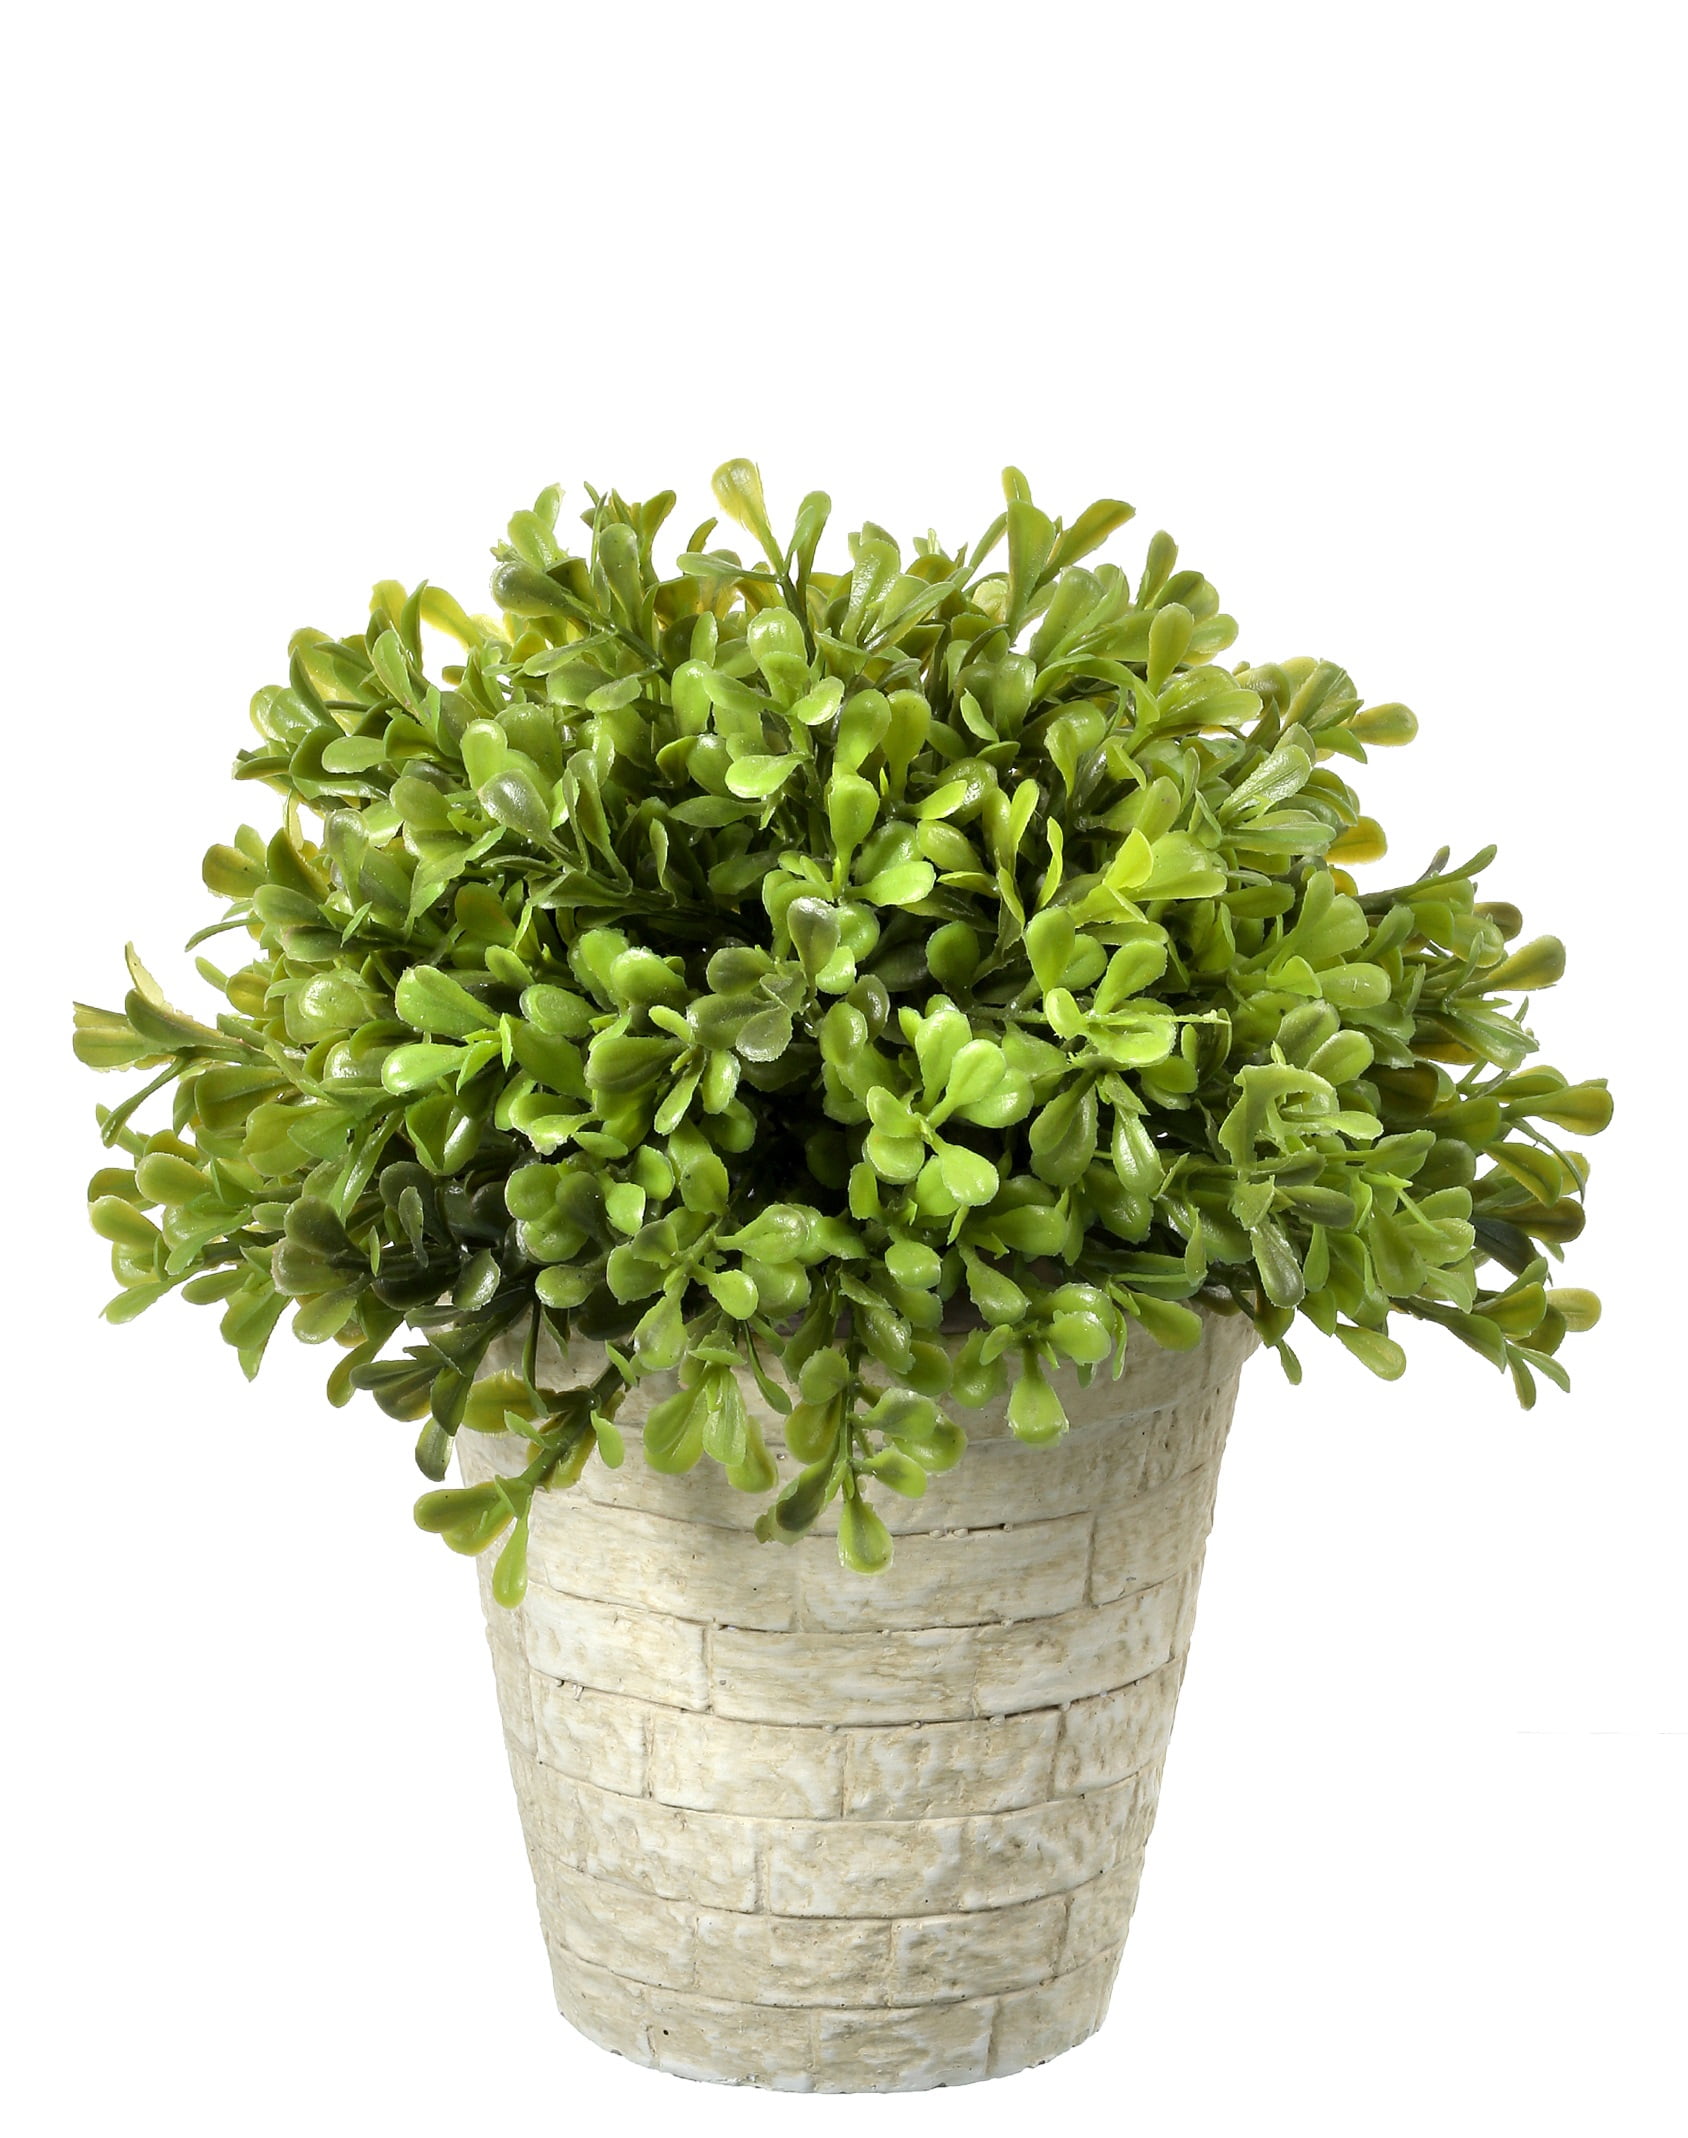 Regency Spring Artificial Boxwood Dome Topiary 8"